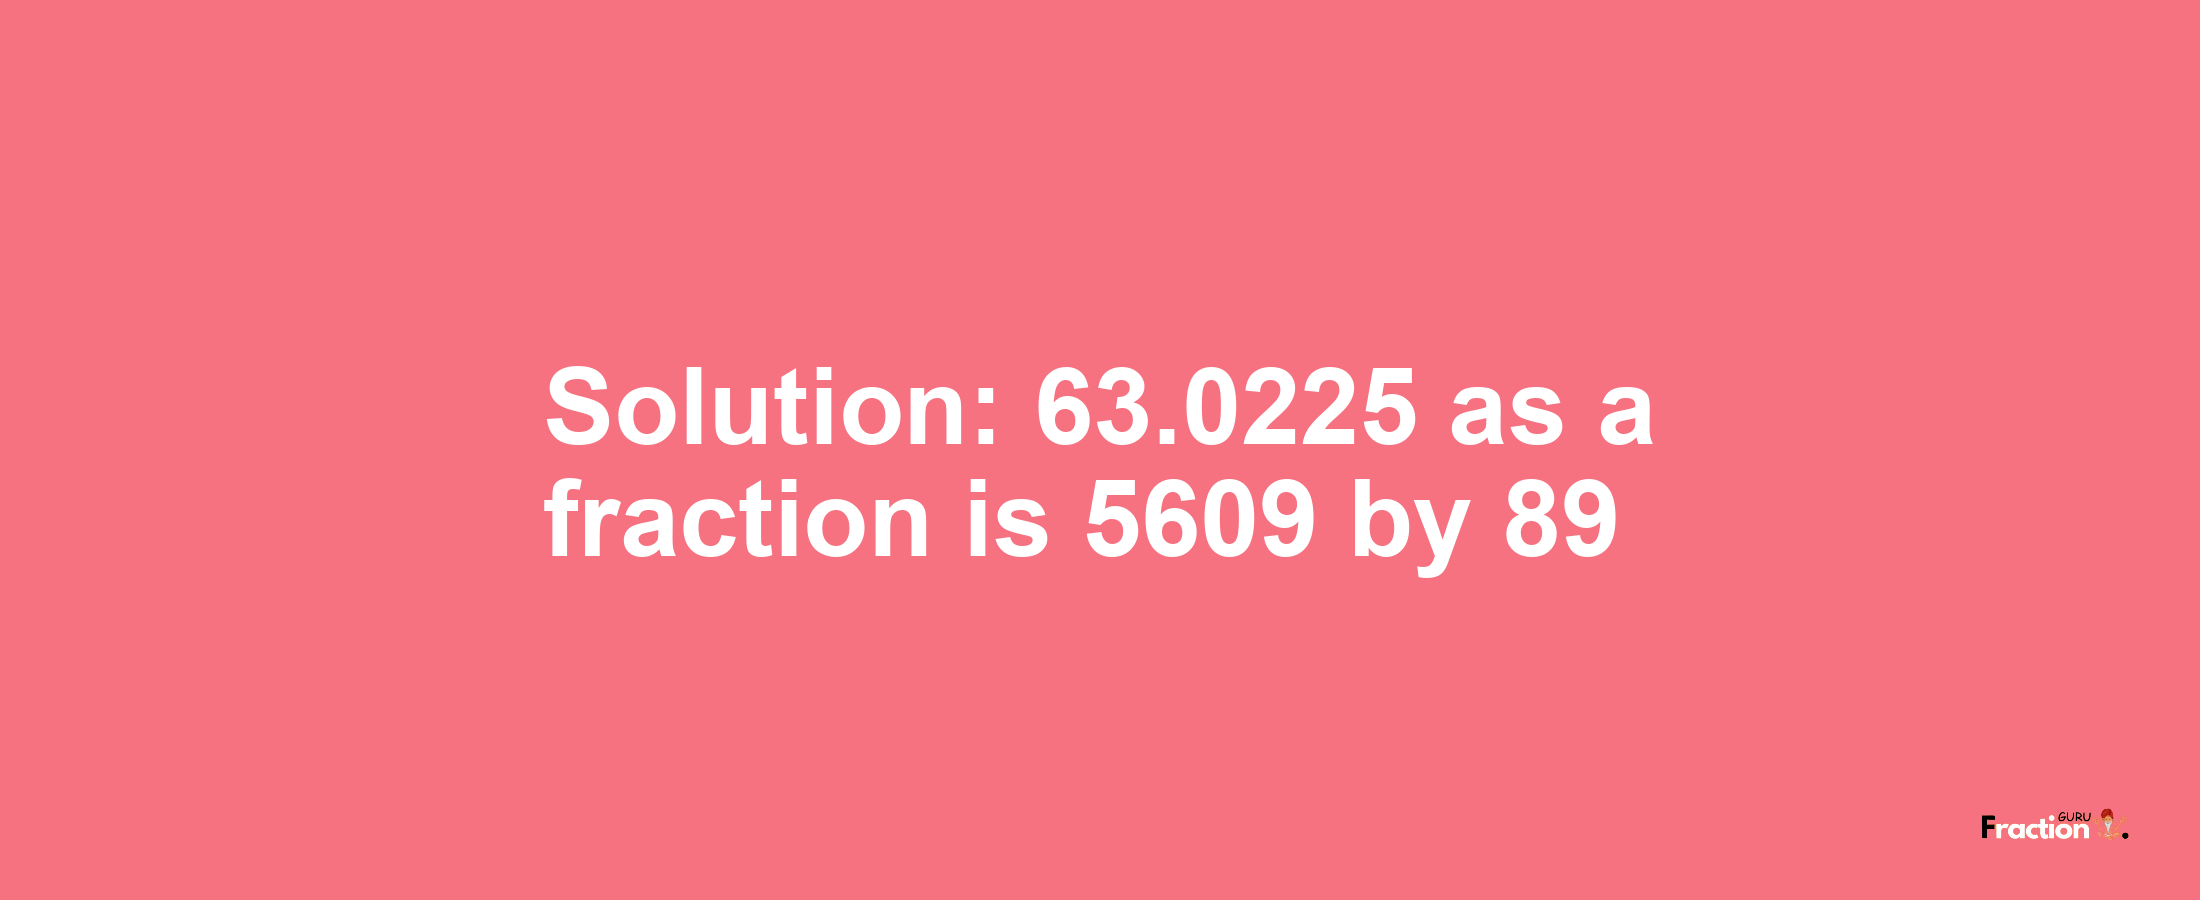 Solution:63.0225 as a fraction is 5609/89